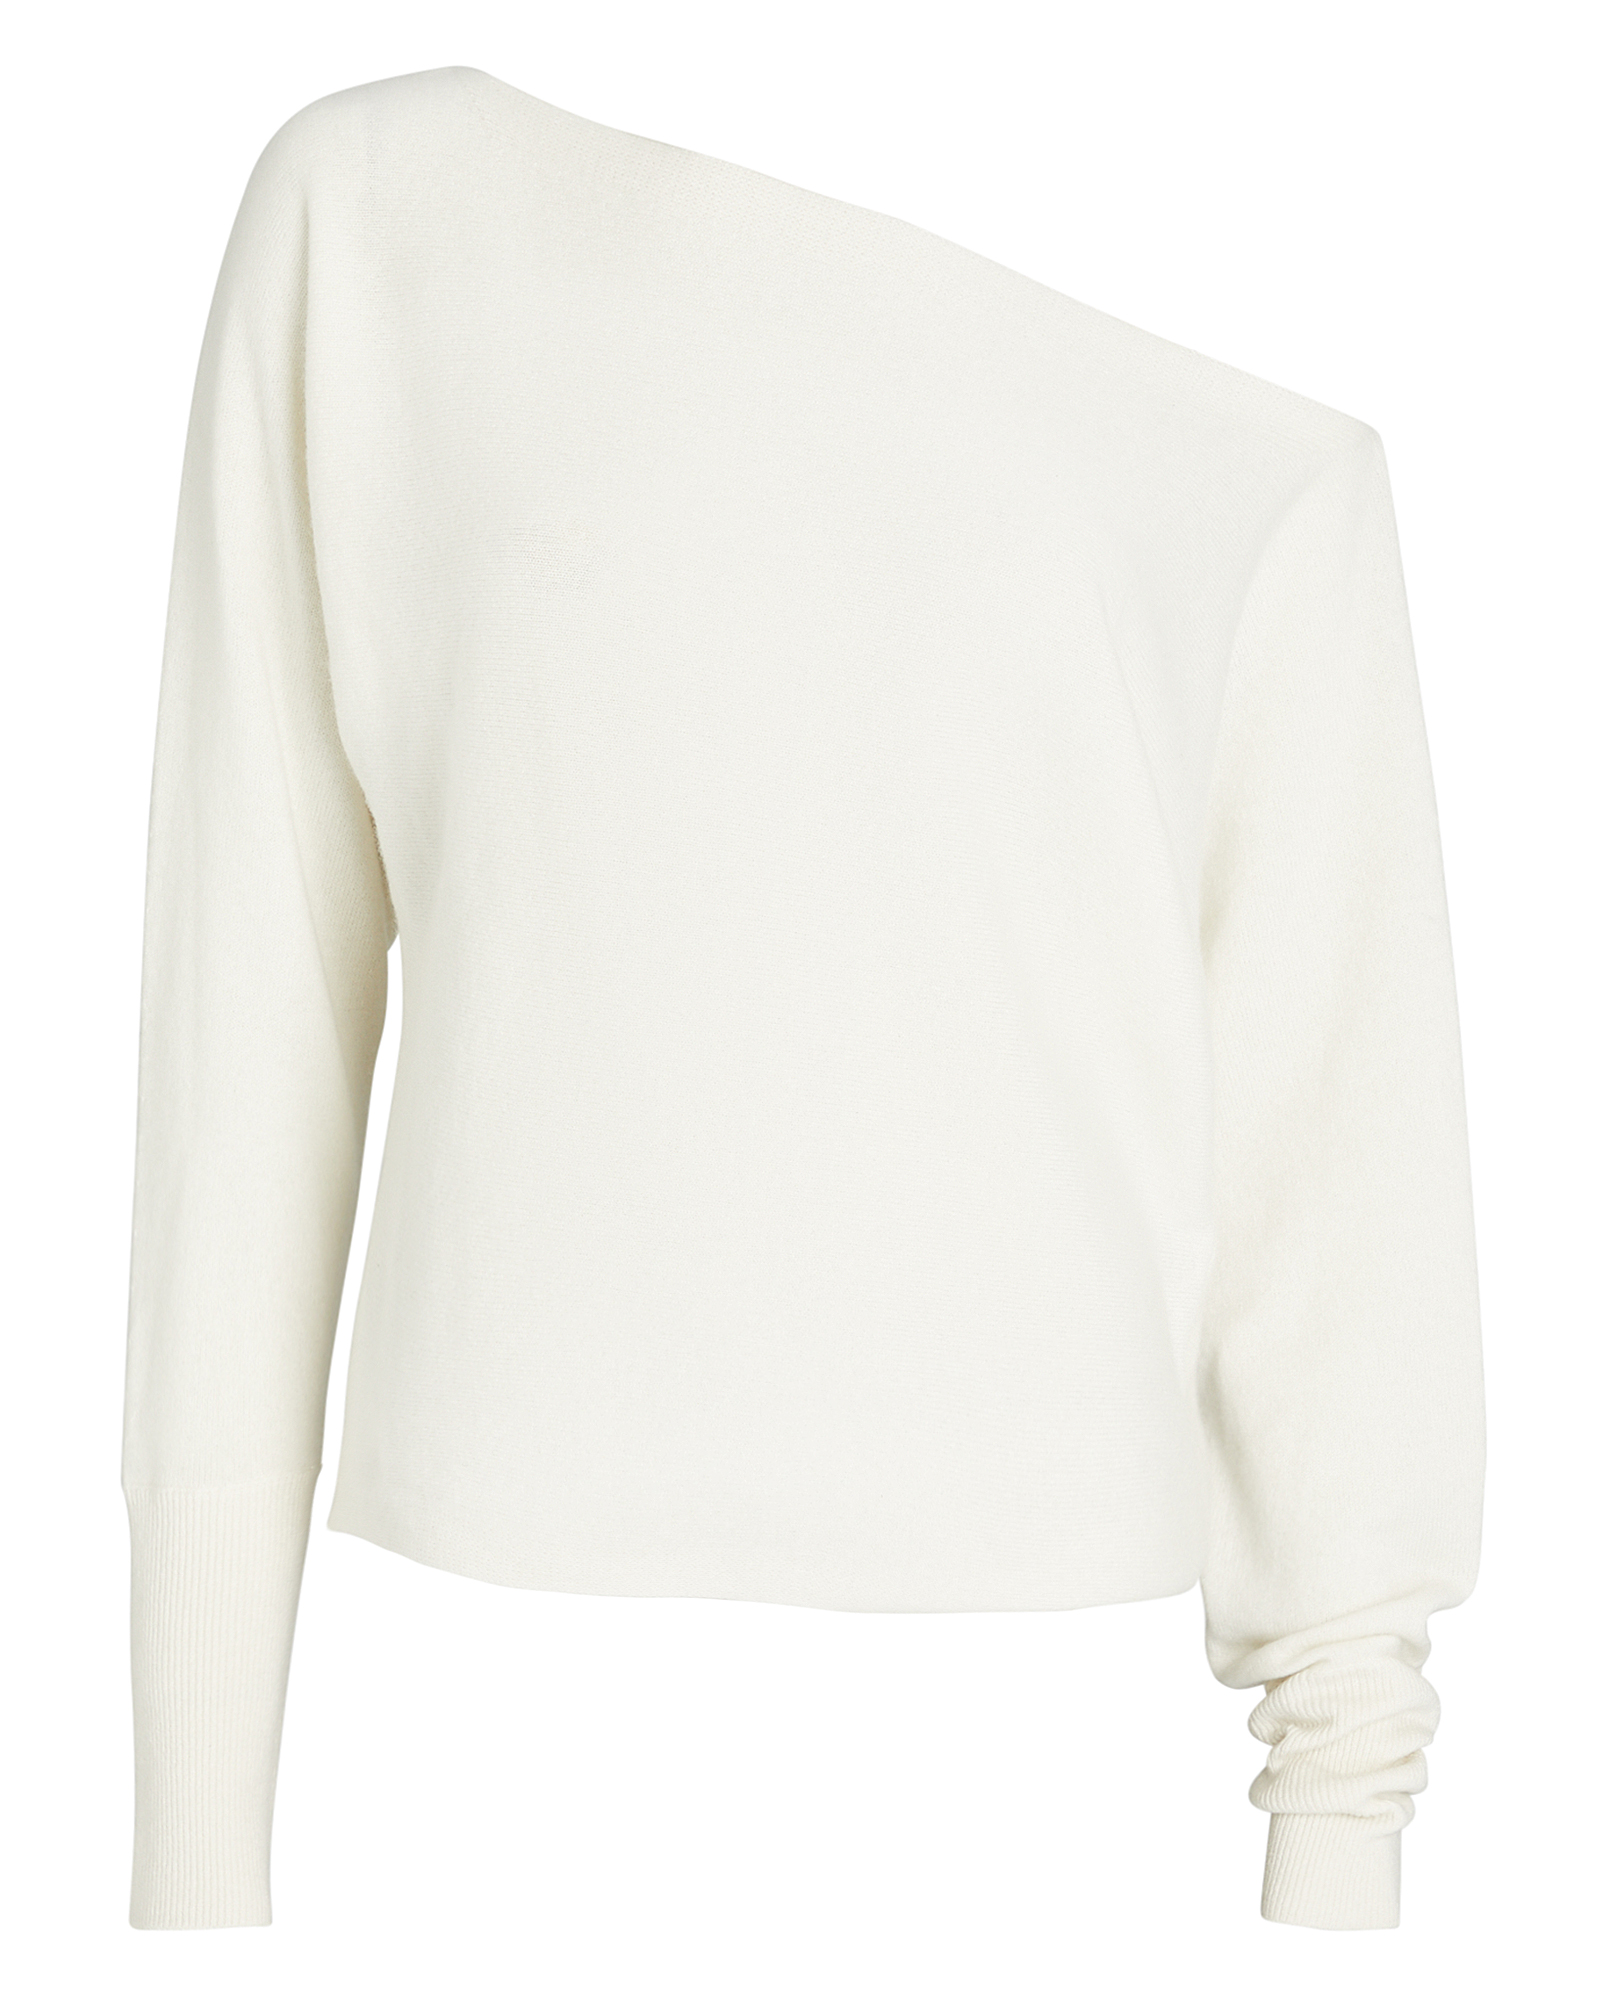 INTERMIX Private Label Off-the-Shoulder Sweater in Ivory | INTERMIX®